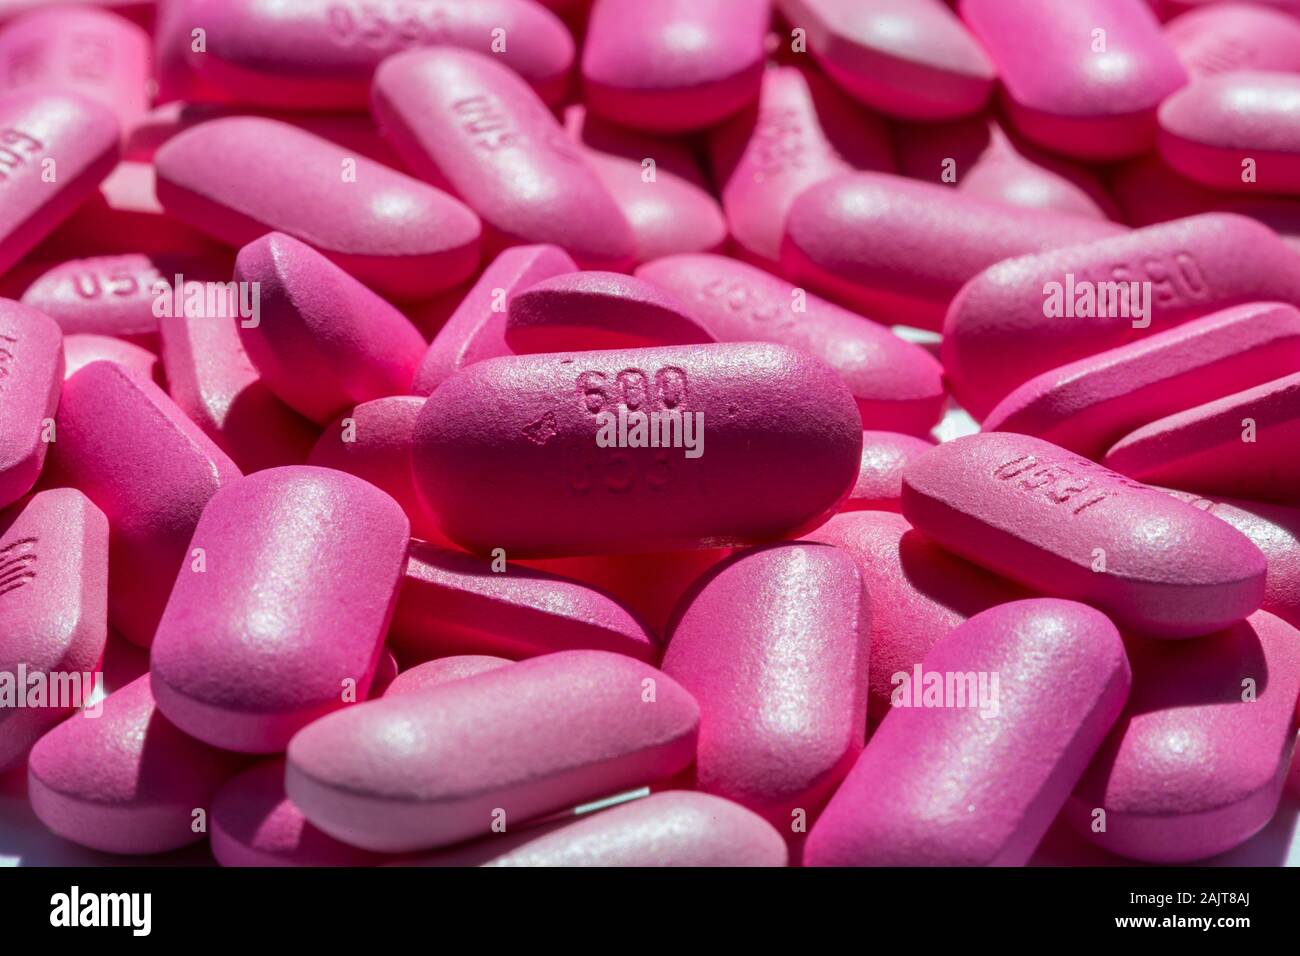 Ibuprofen tablets for pain relief. Stock Photo